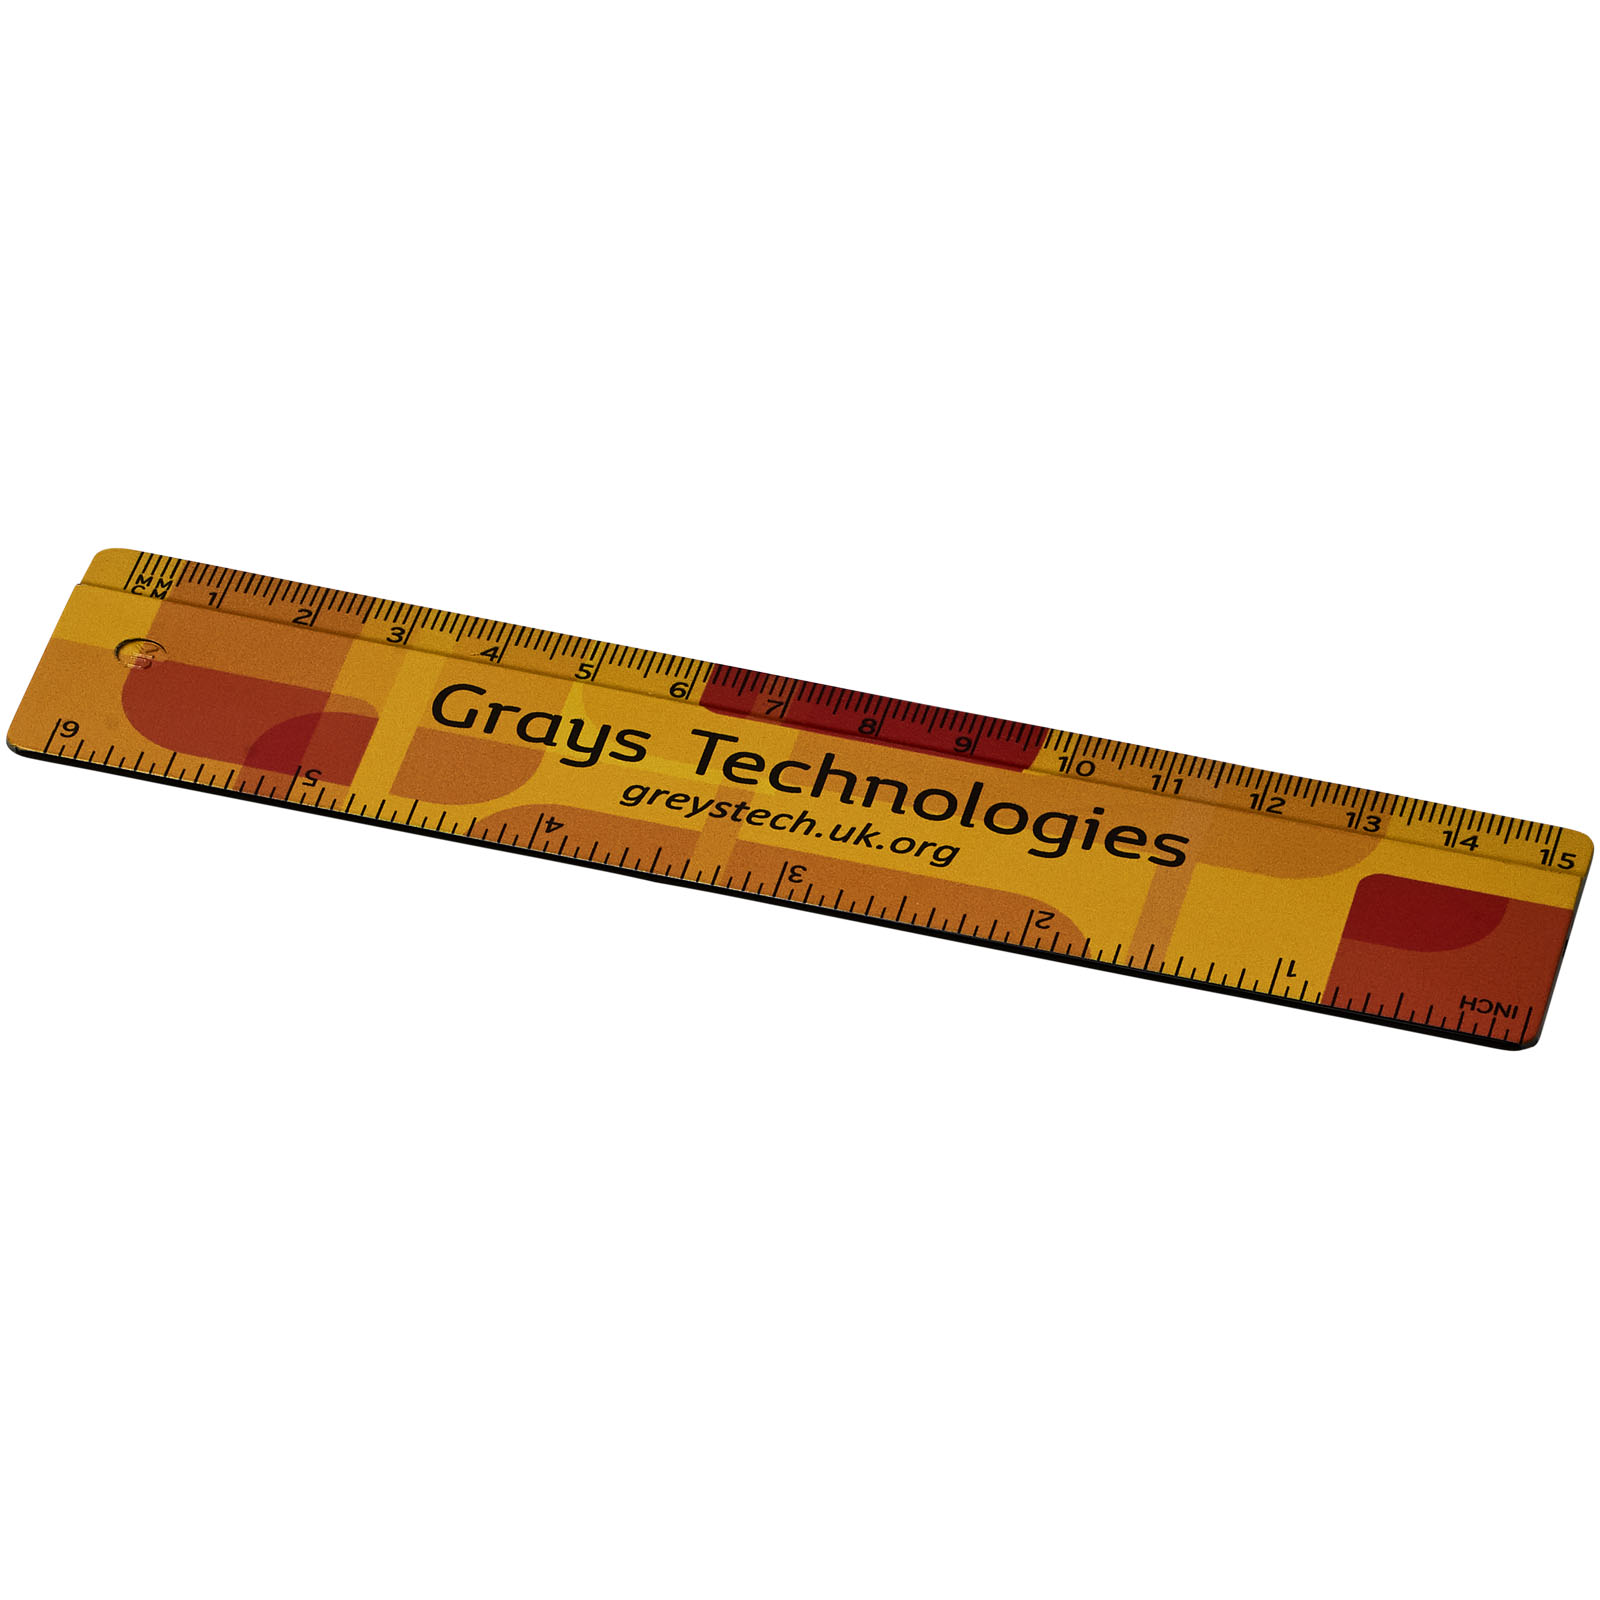 Advertising Desk Accessories - Terran 15 cm ruler from 100% recycled plastic